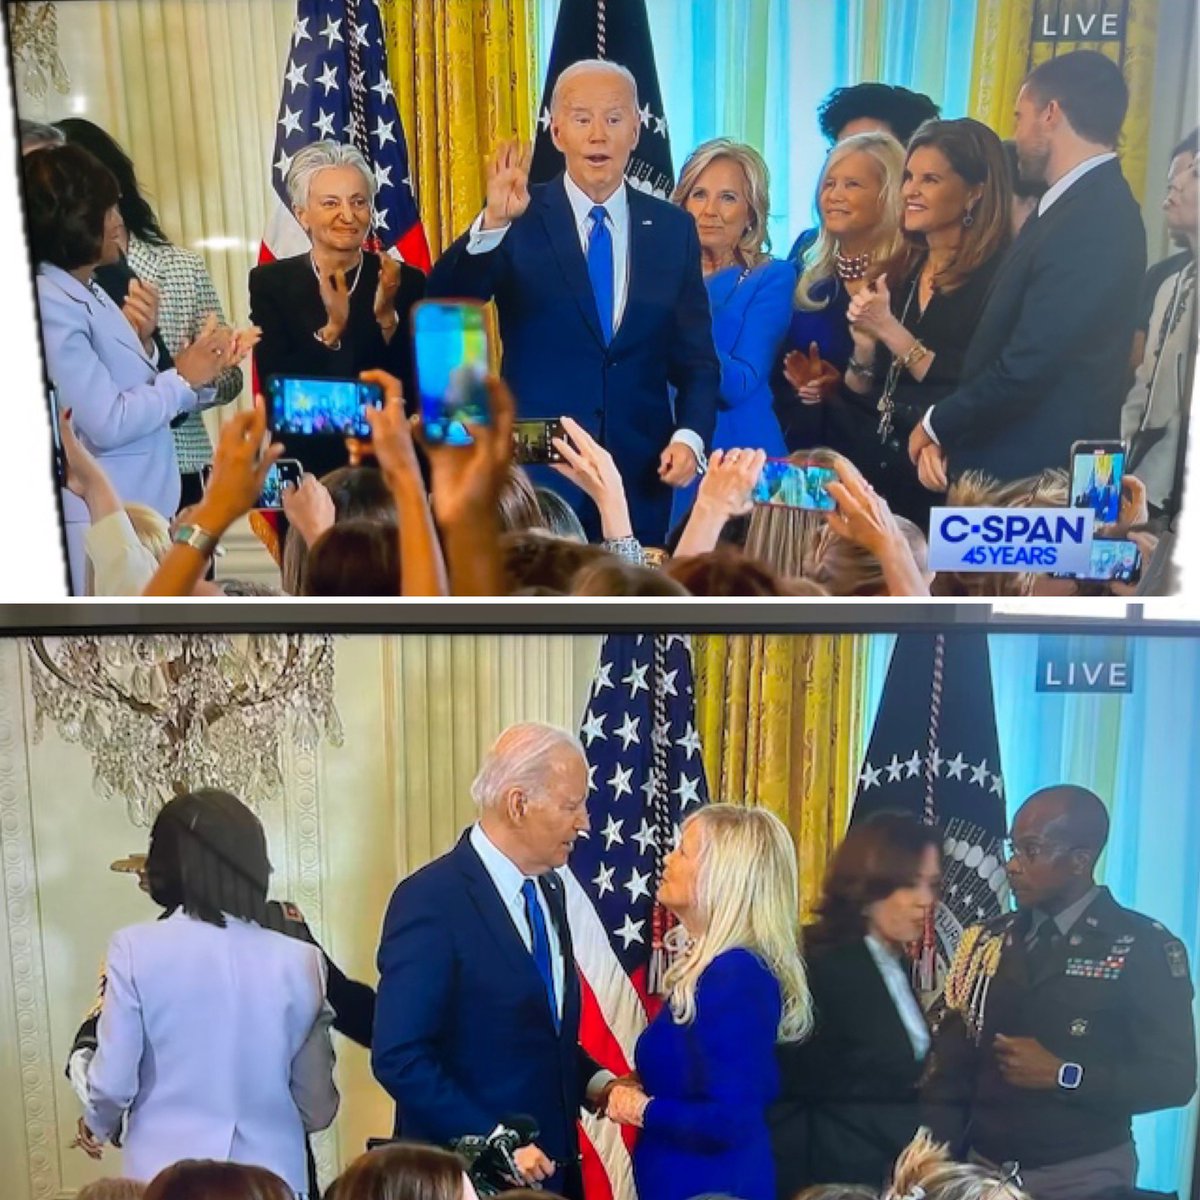 As a scientist devoting her time on women's health, so wonderful to witness Biden’s Women's Health Research Initiative! Amazing to see my role model, Dr. Susan Blumenthal to be recognized on stage for her pioneering work in exposing the inequities in women’s health❤️ Onward!